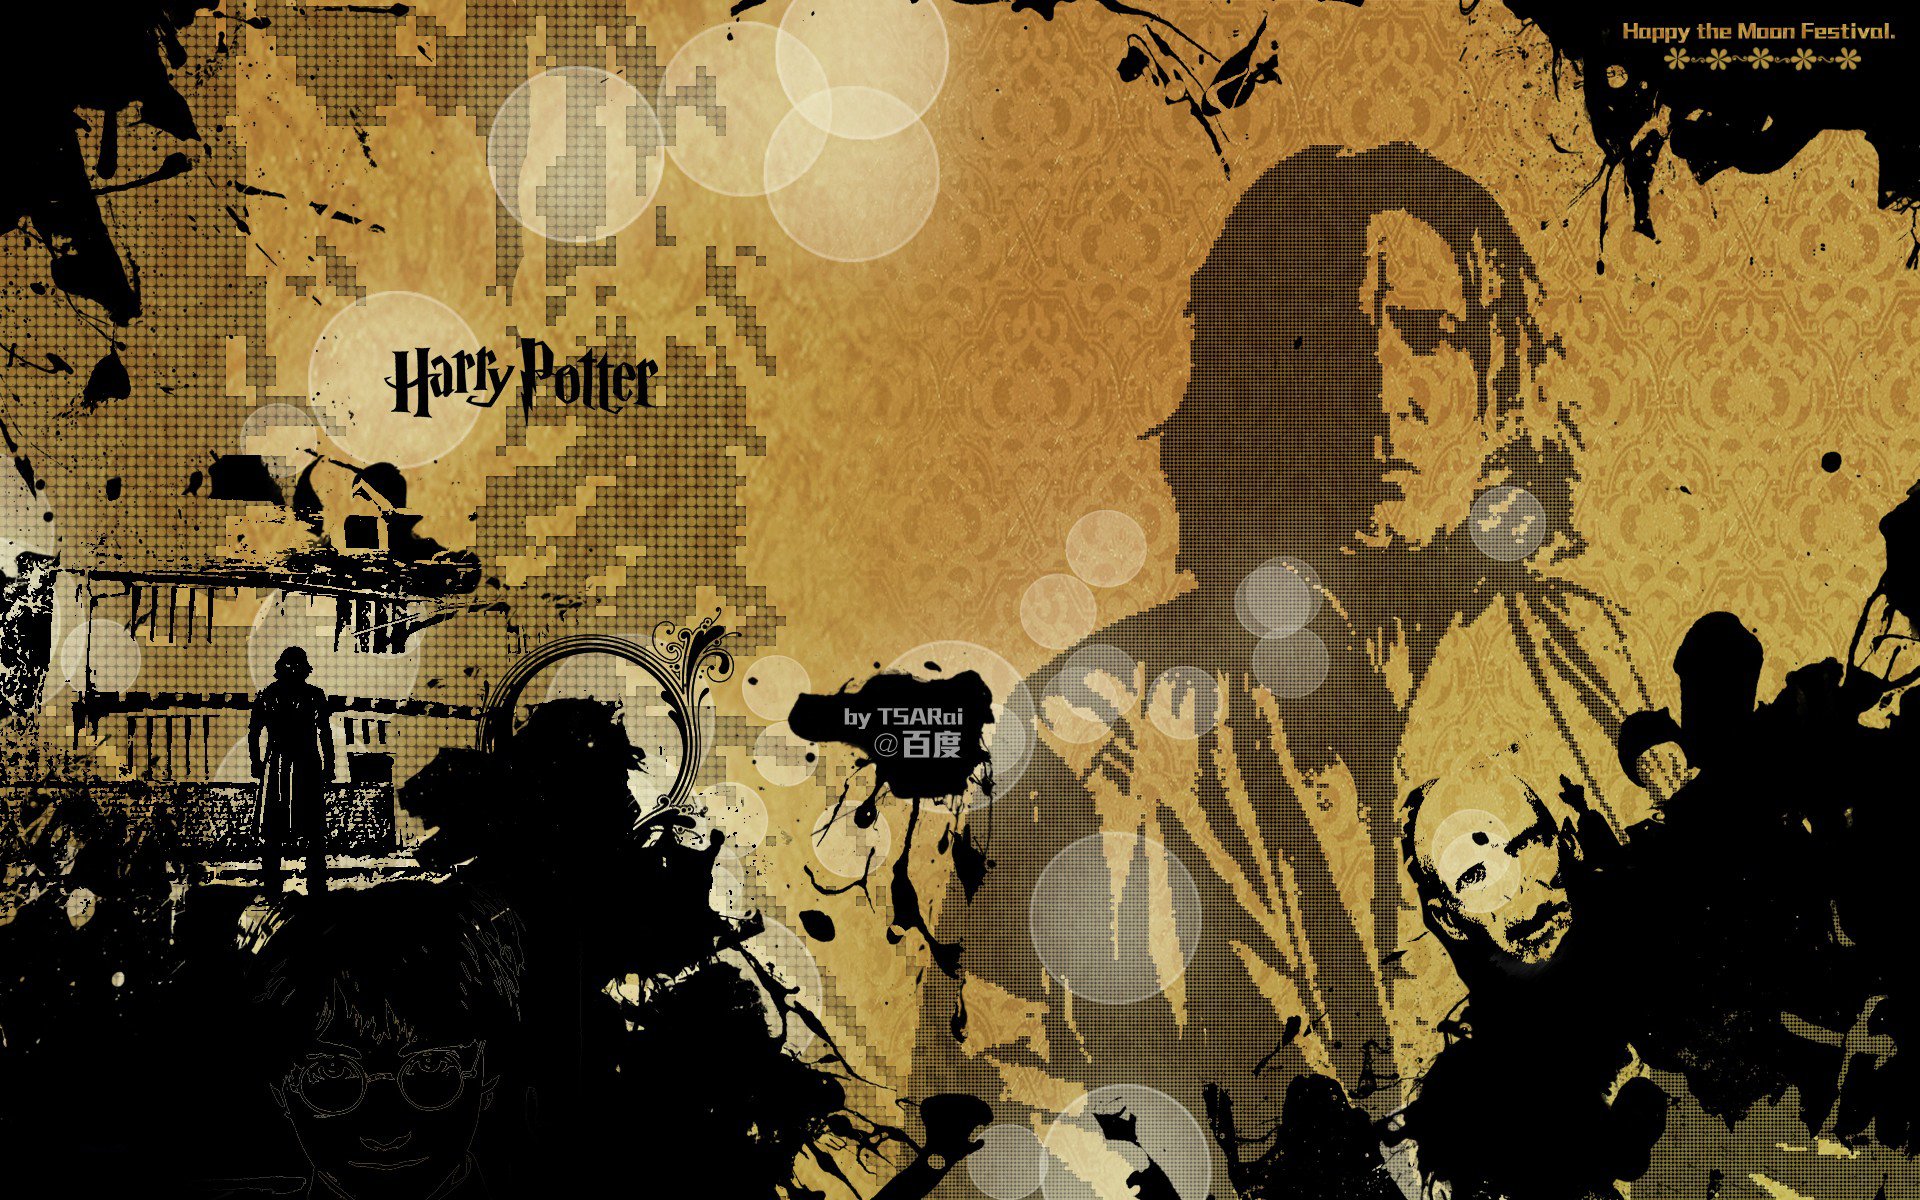 81+ Free Harry Potter Wallpaper Backgrounds for iPhone | IdeasToKnow